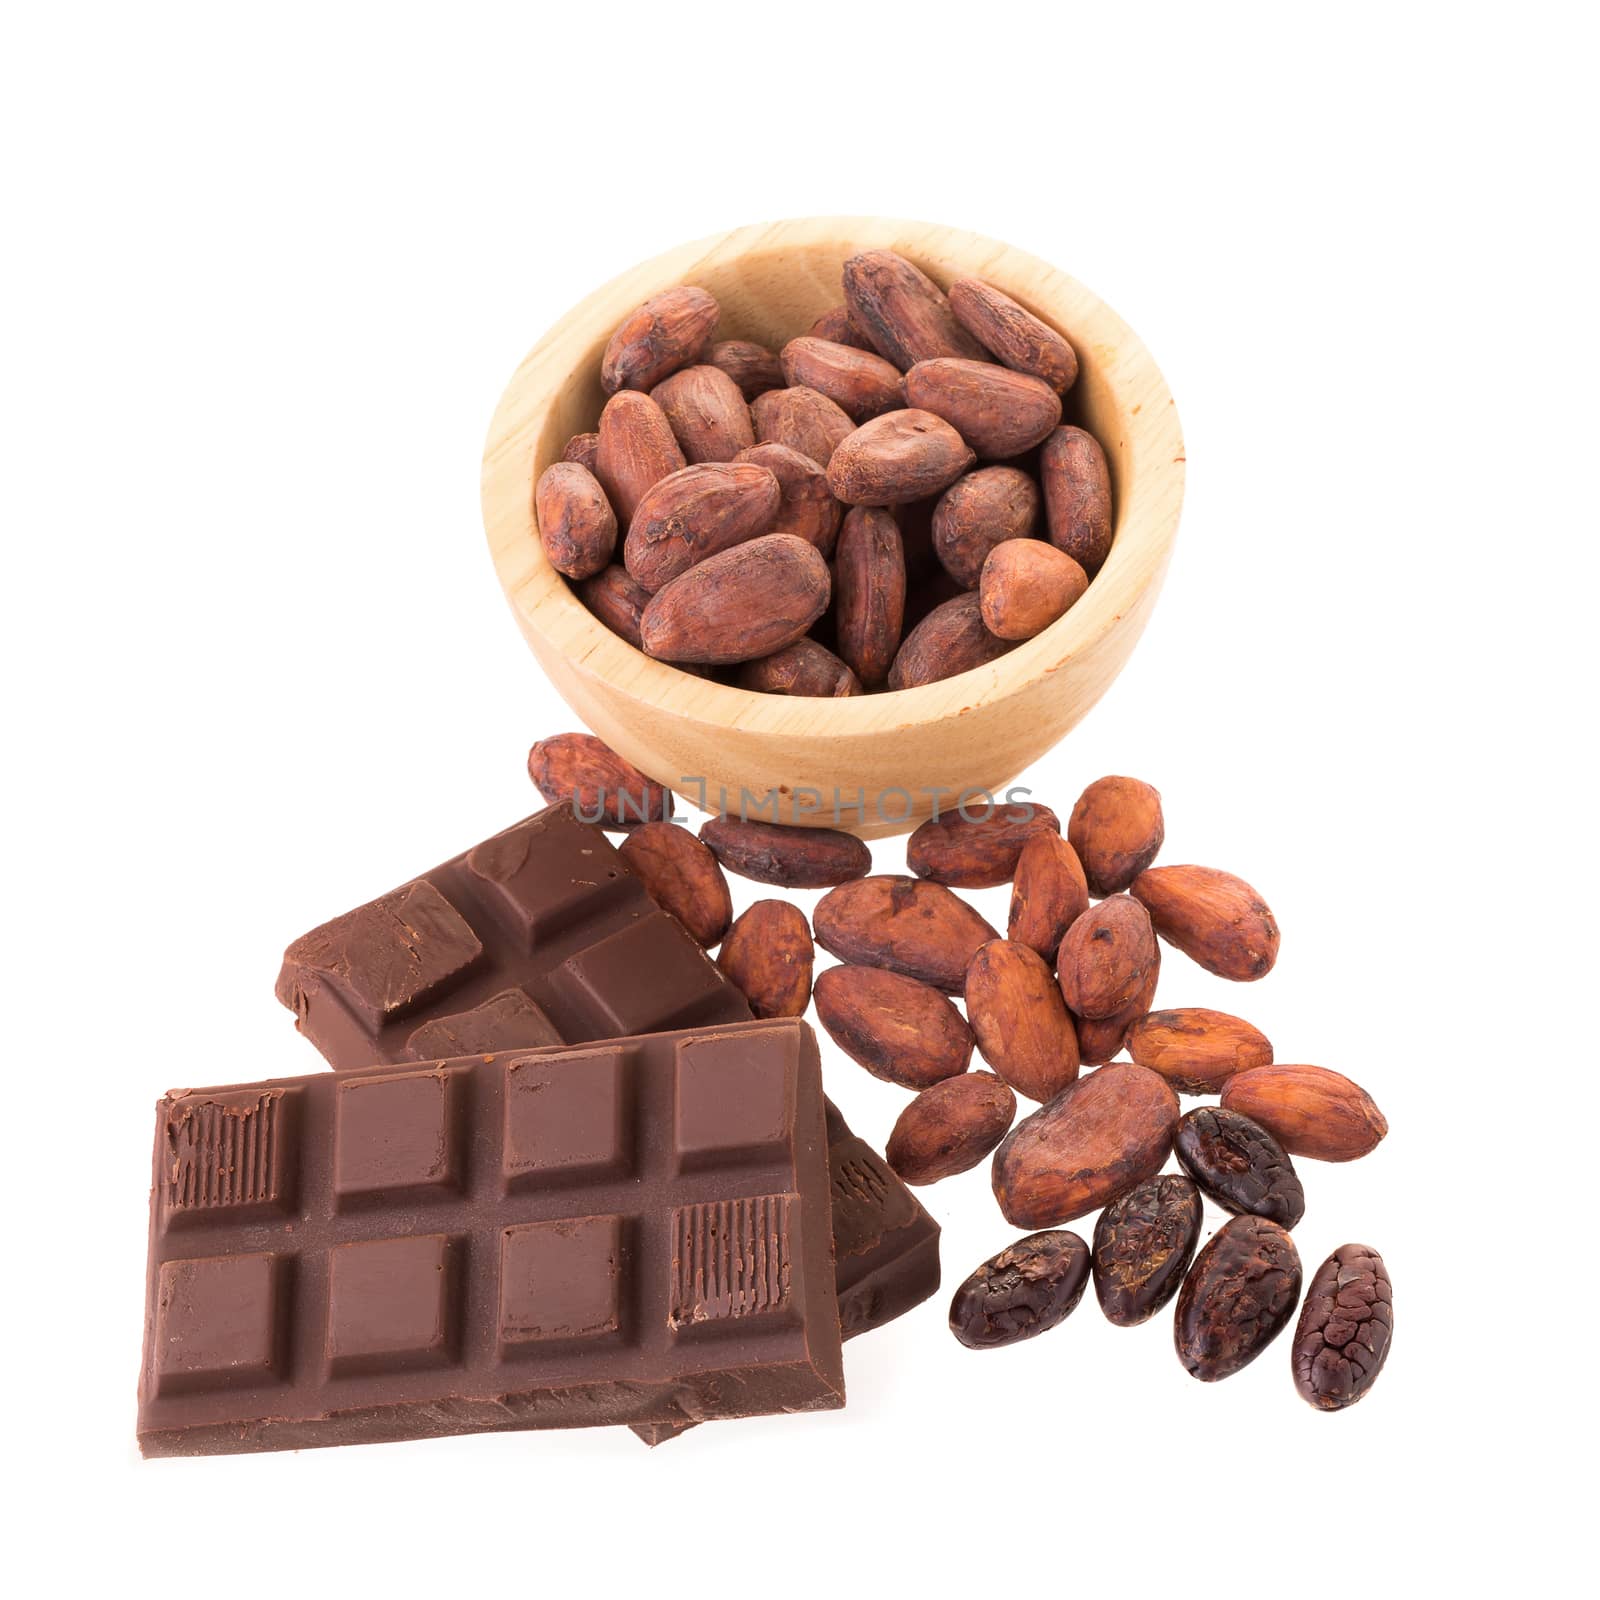 Chocolate with cacao, isolated on white background.